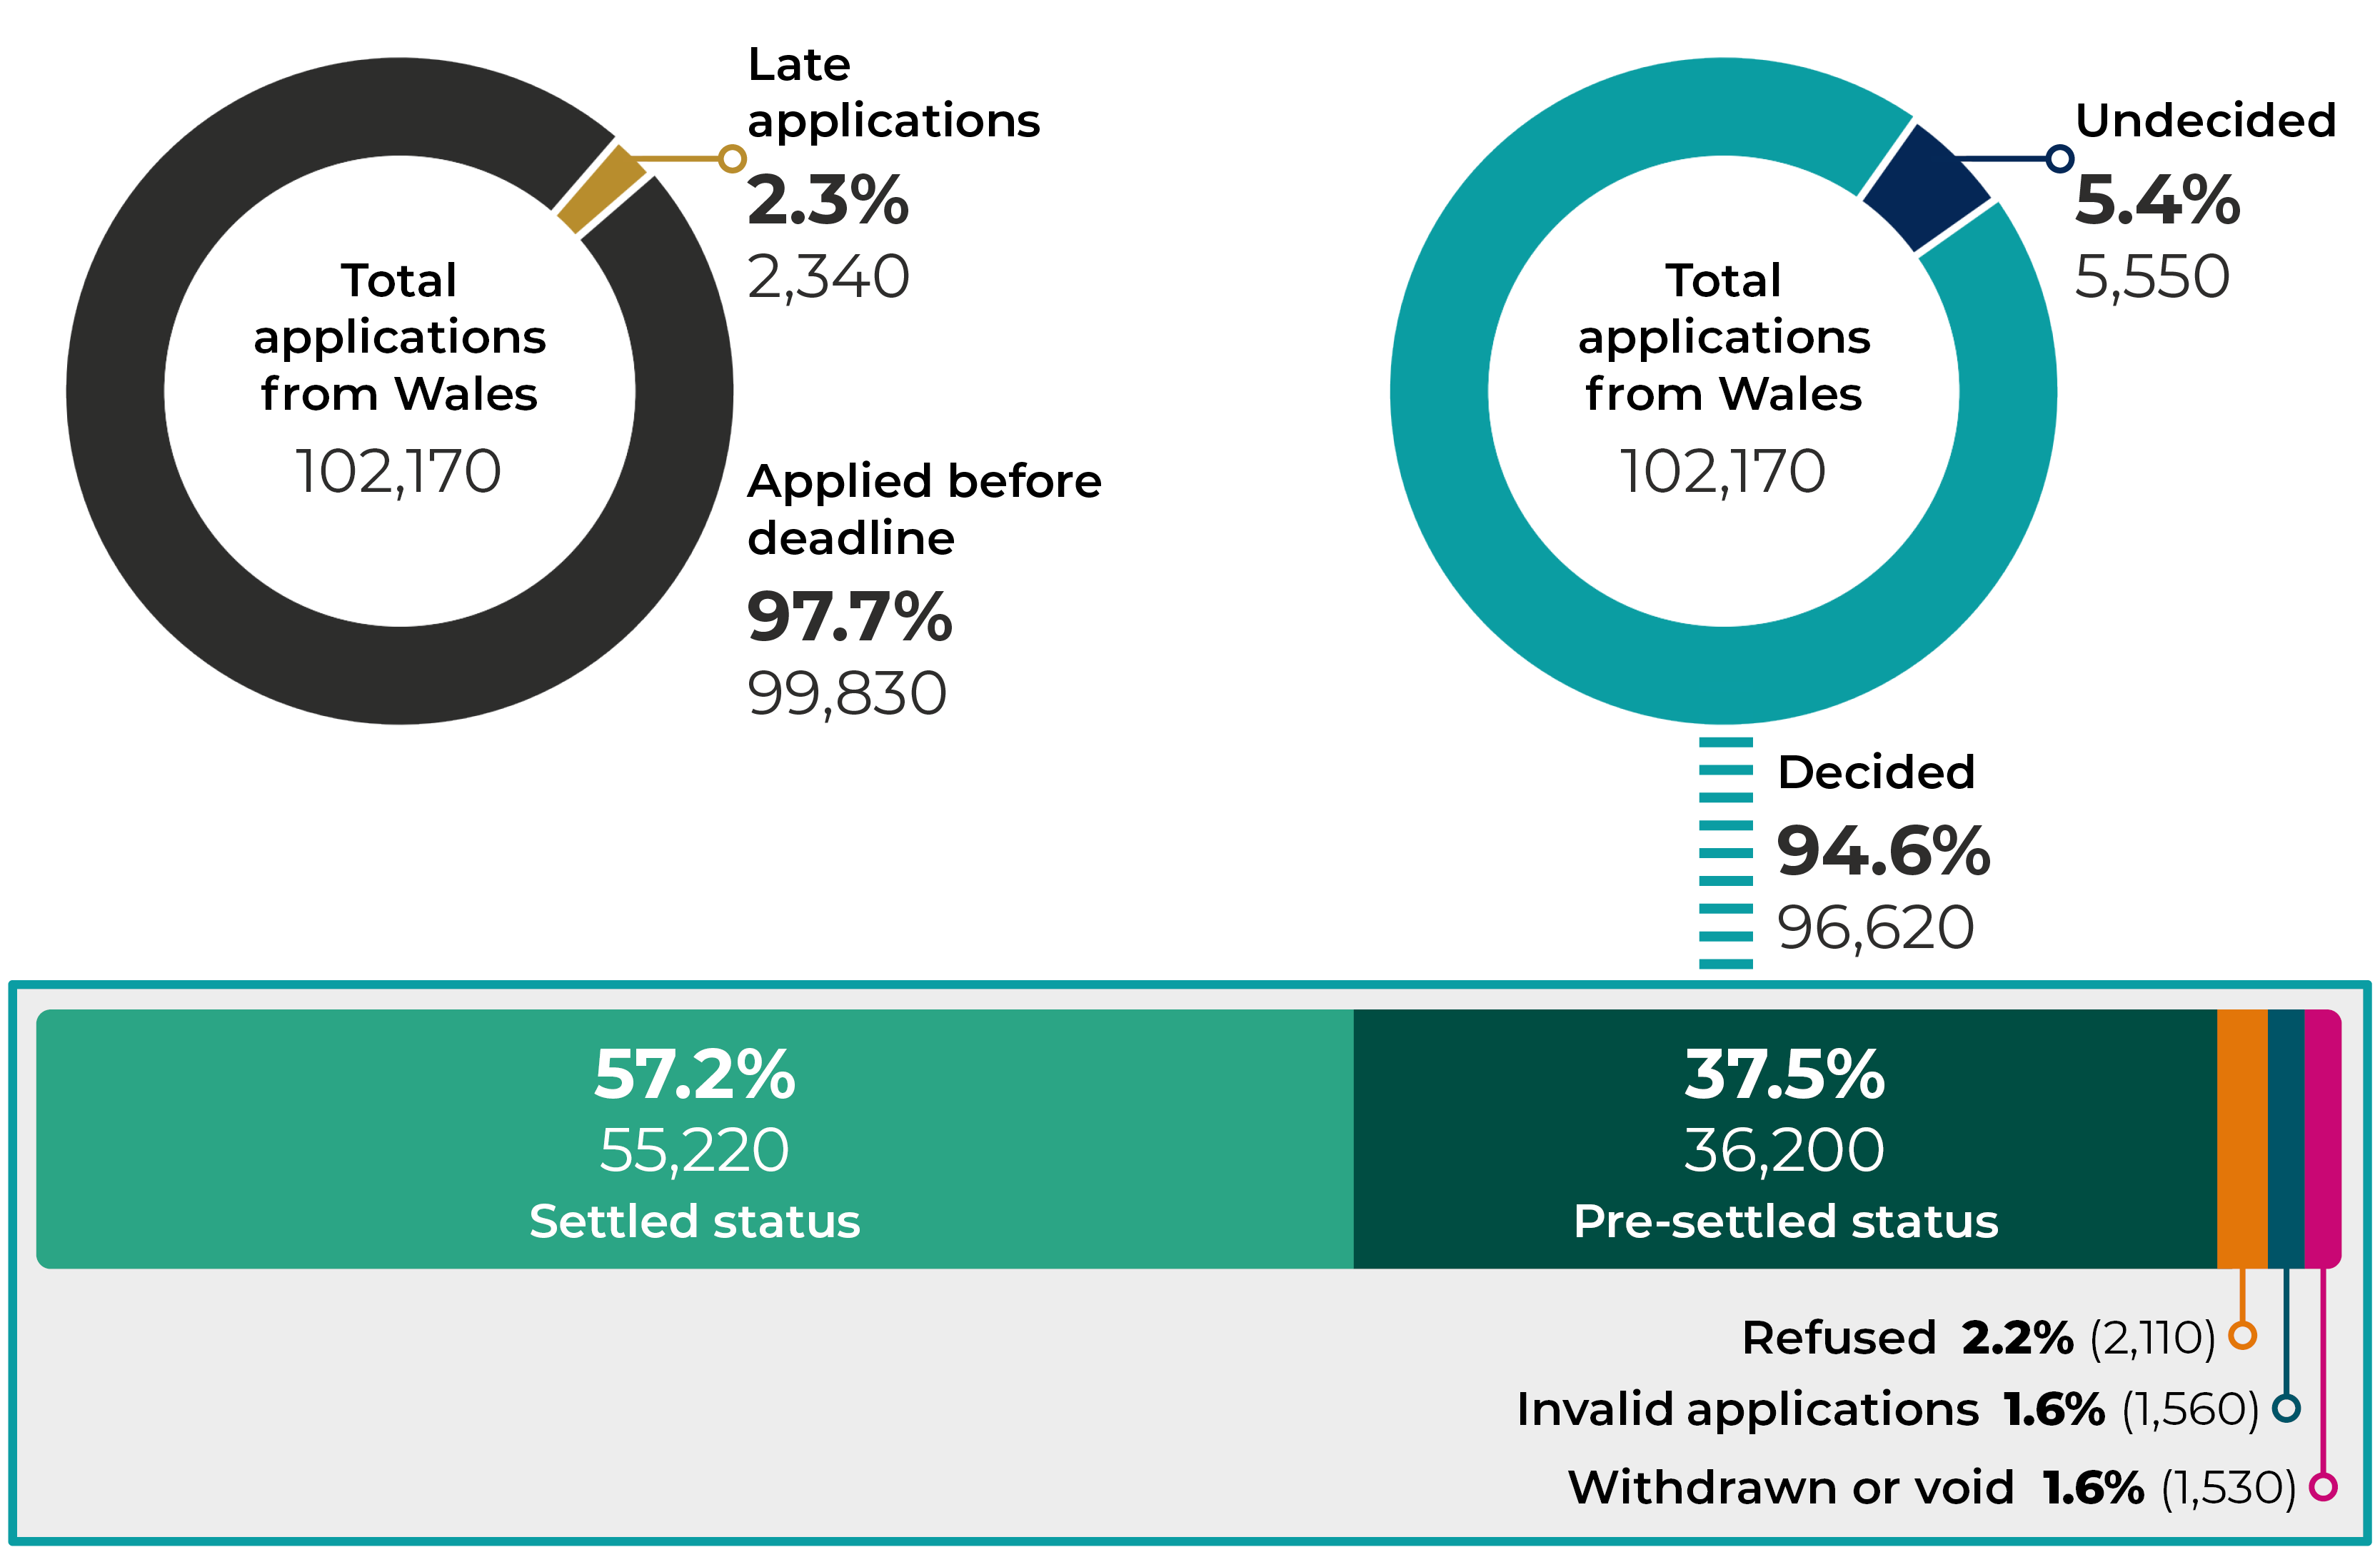 Infographic showing outcomes of 102170 applications from Wales. 97.7% (99830) applied before the deadline and 2.3% (2340) were late applications. 94.6% (96620) of applications are decided and 5.4% (5550) are undecided. Of the decided applications, 57.2% (55220) were granted settled status, 37.5% (36200) were granted pre-settled status, 2.2% (2110) were refused, 1.6% (1560) were invalid and 1.6% (1530) were withdrawn or void.